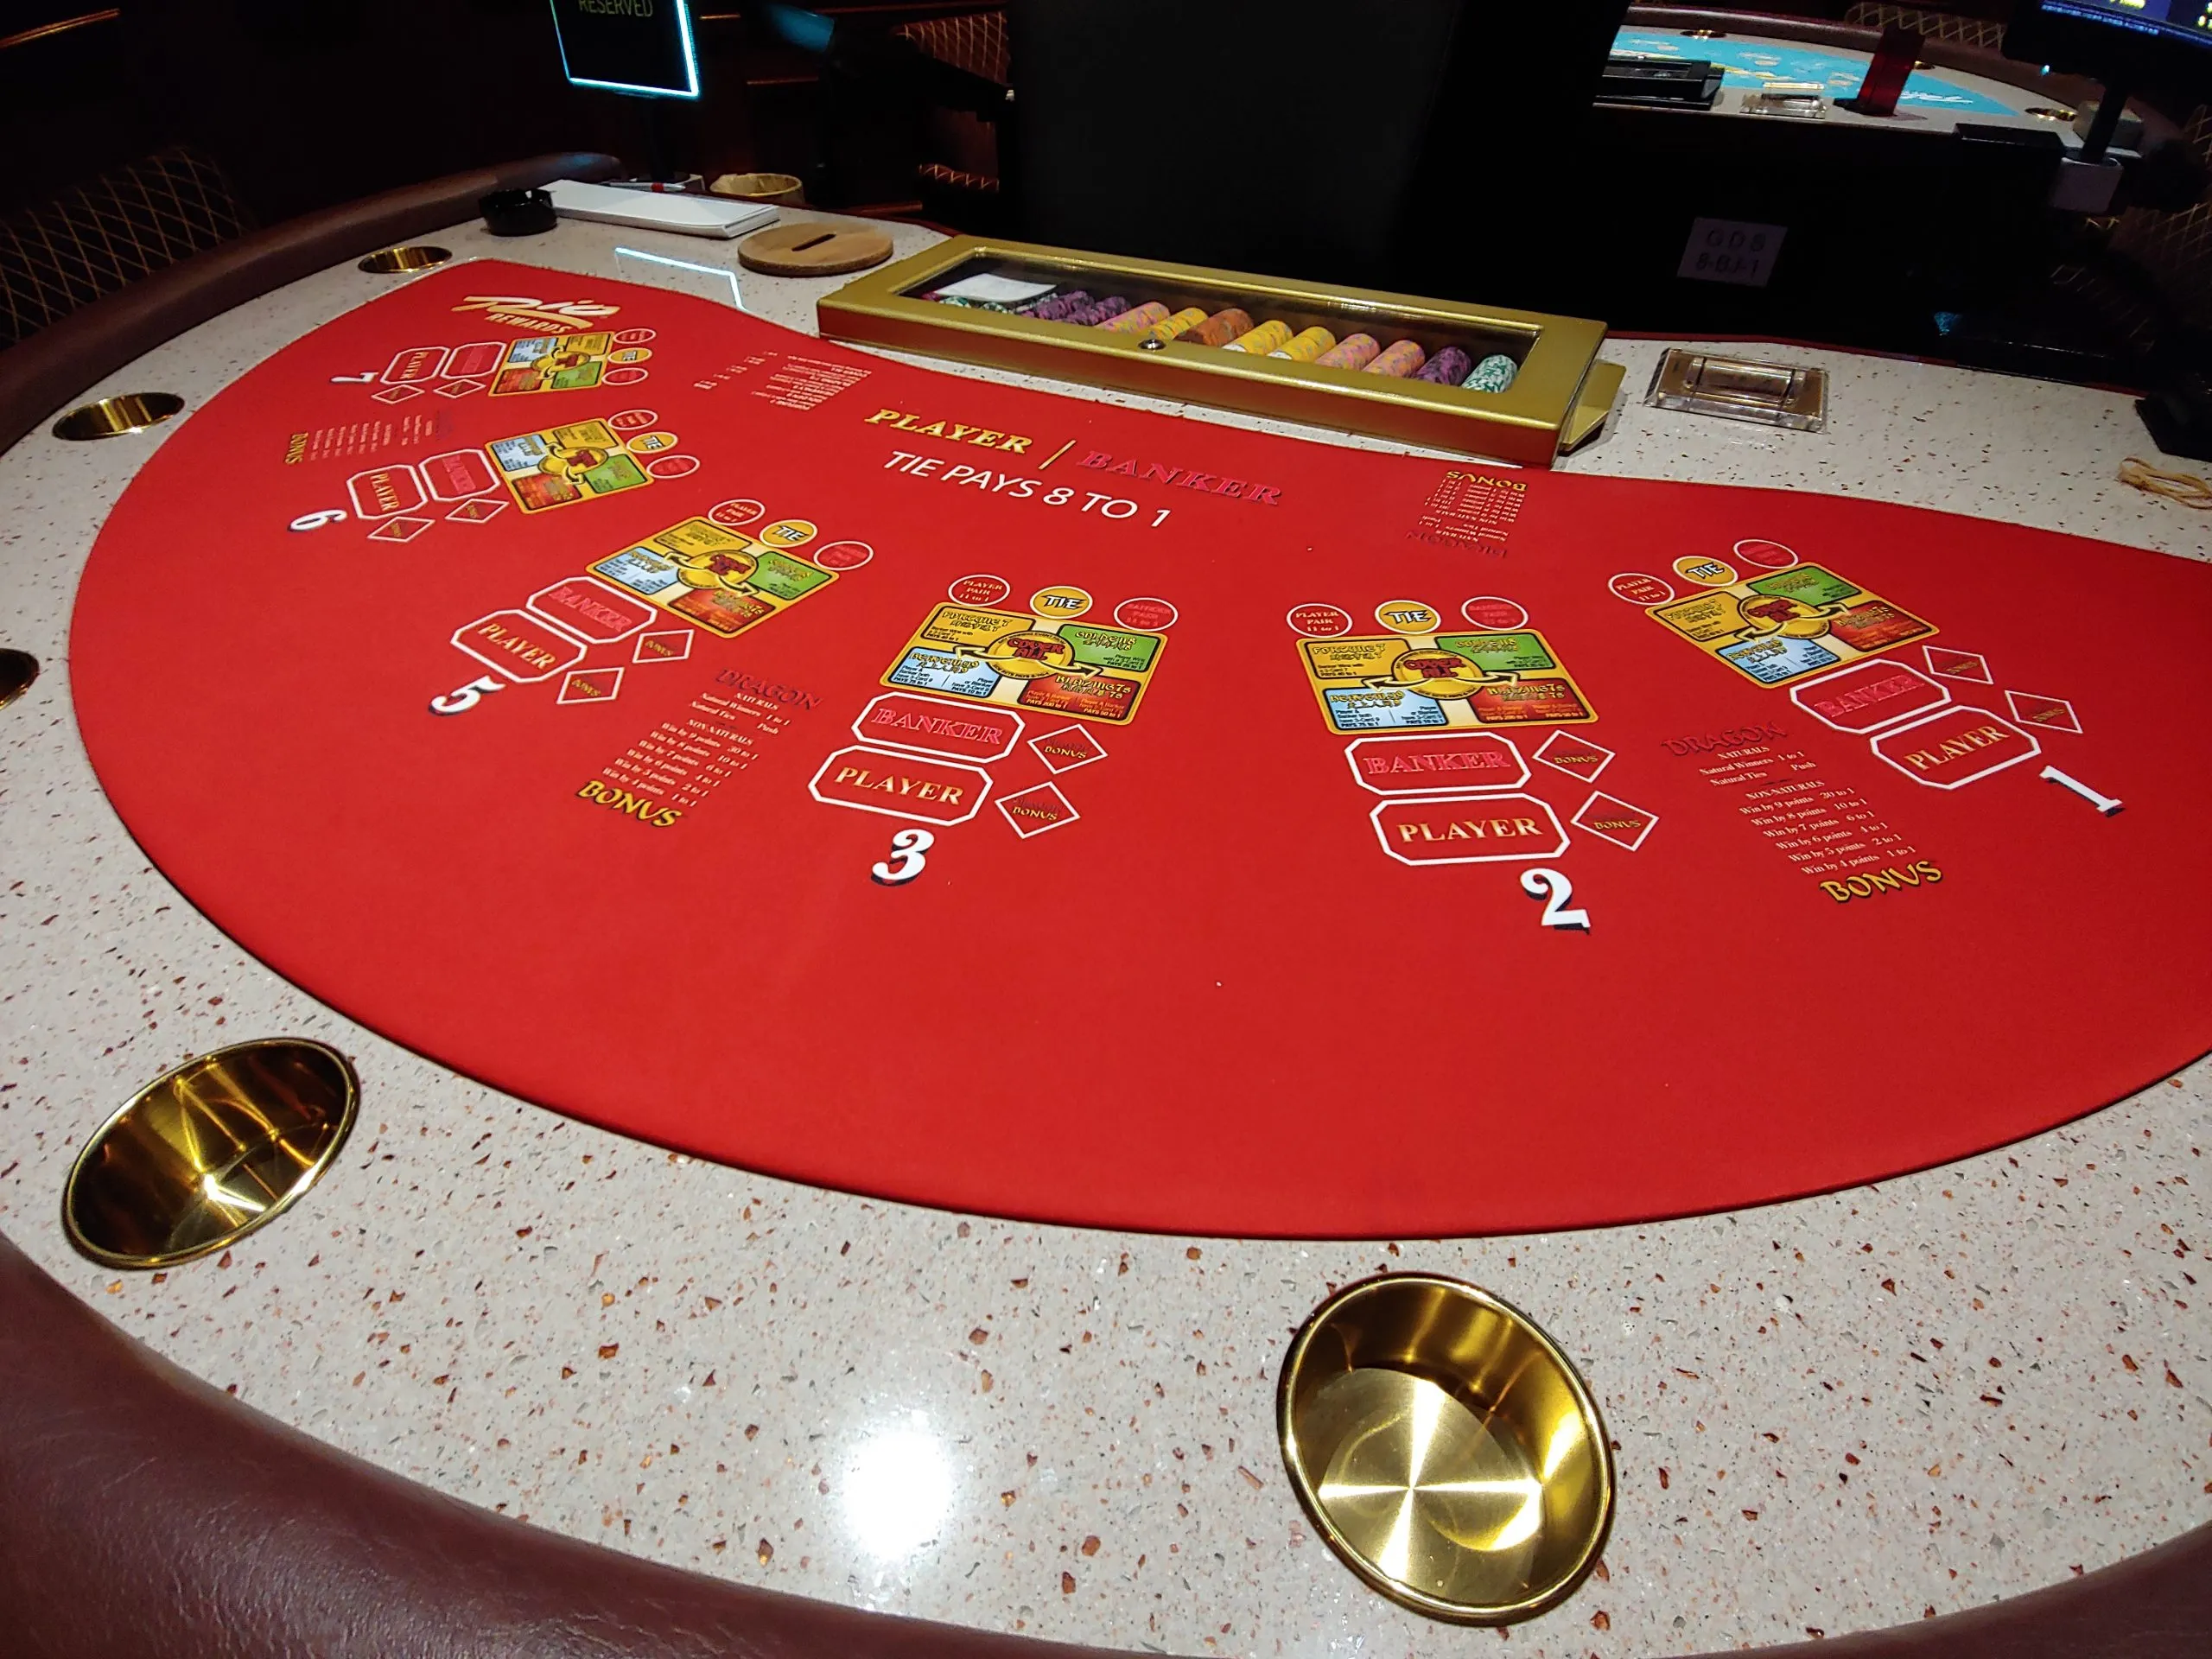 Baccarat table in High Limit at Rio Casino on March 18, 2024.